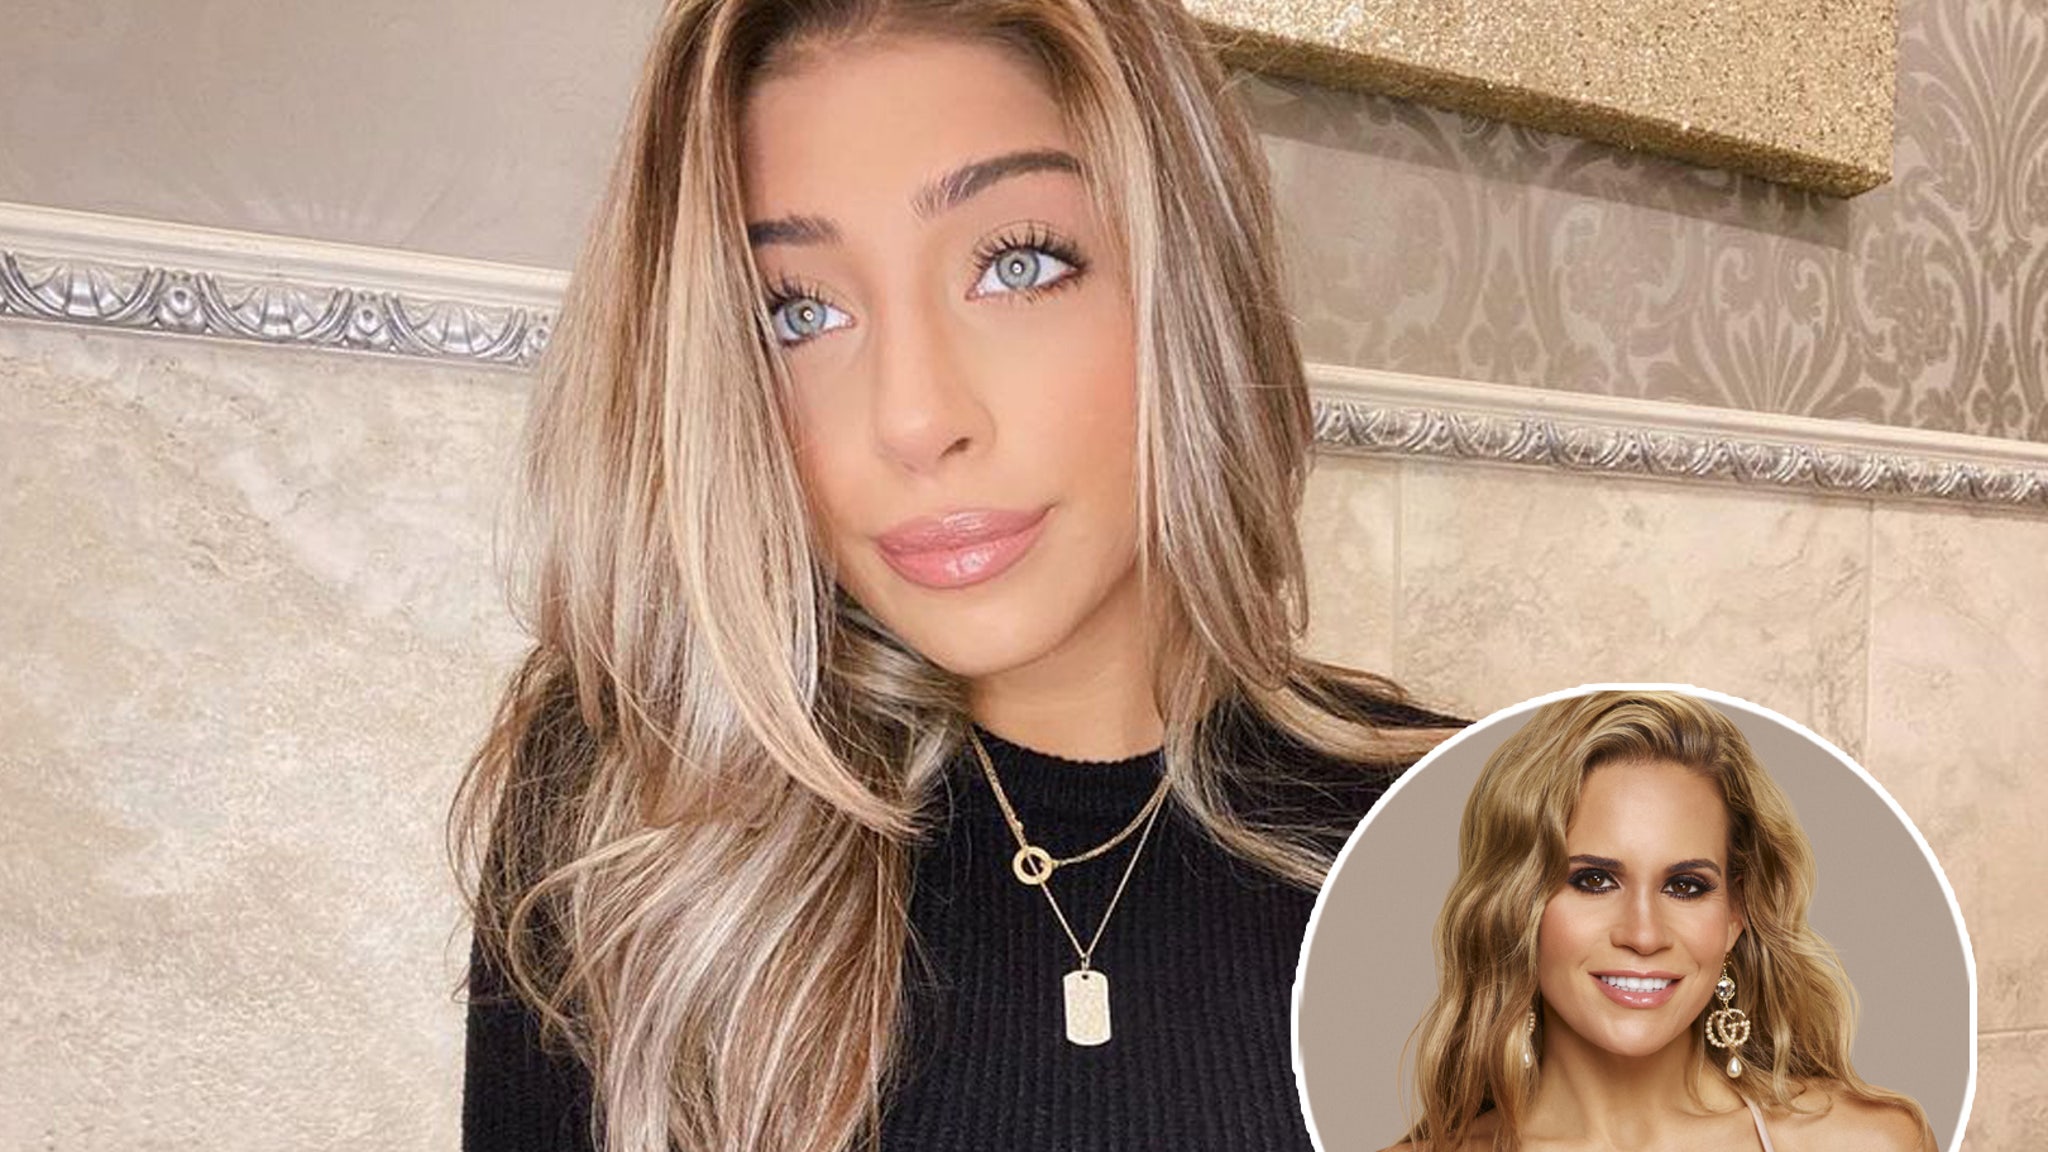 Gia Giudice reacts to Jackie Goldschneider’s comment ‘Snorts Coke in the Bathroom’